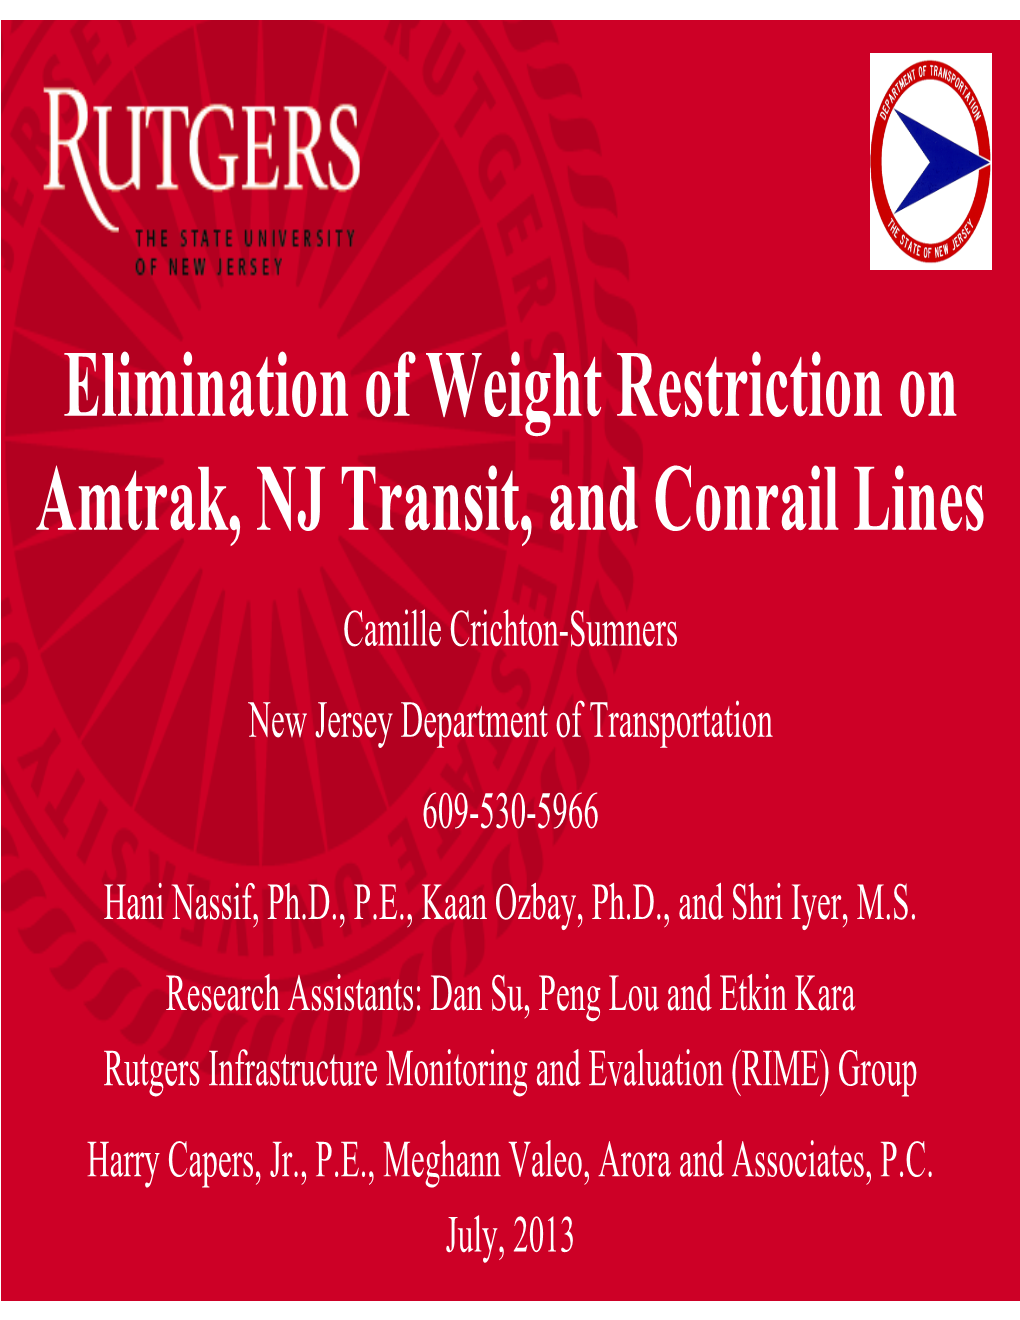 Elimination of Weight Restriction on Amtrak, NJ Transit, and Conrail Lines